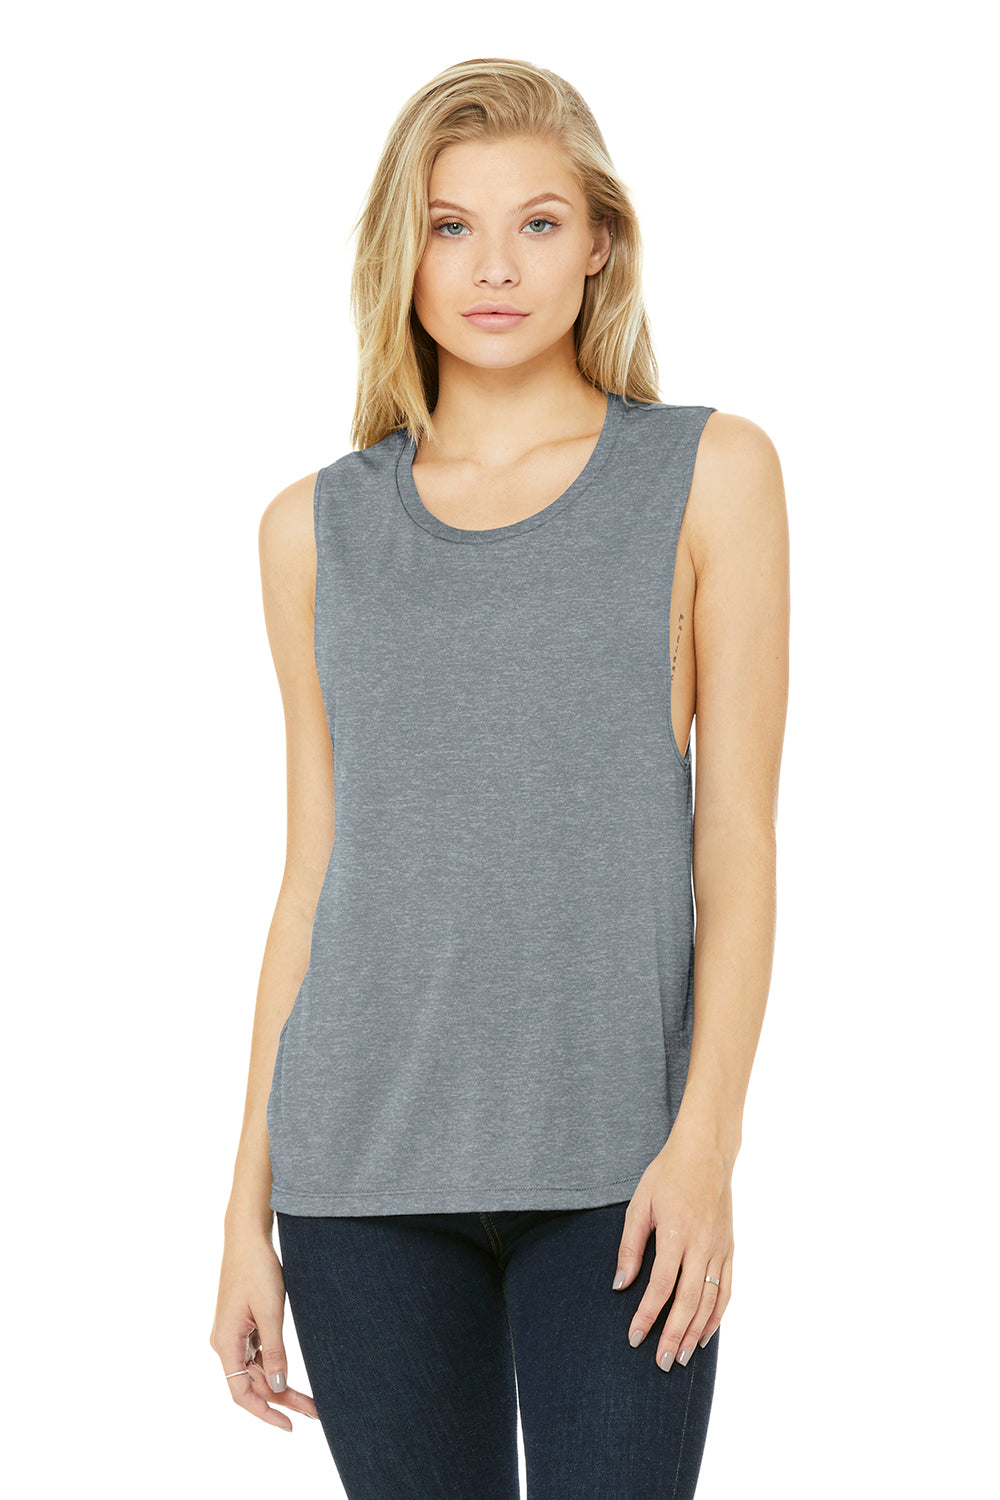 Bella + Canvas BC8803/B8803/8803 Womens Flowy Muscle Tank Top Heather Grey Model Front